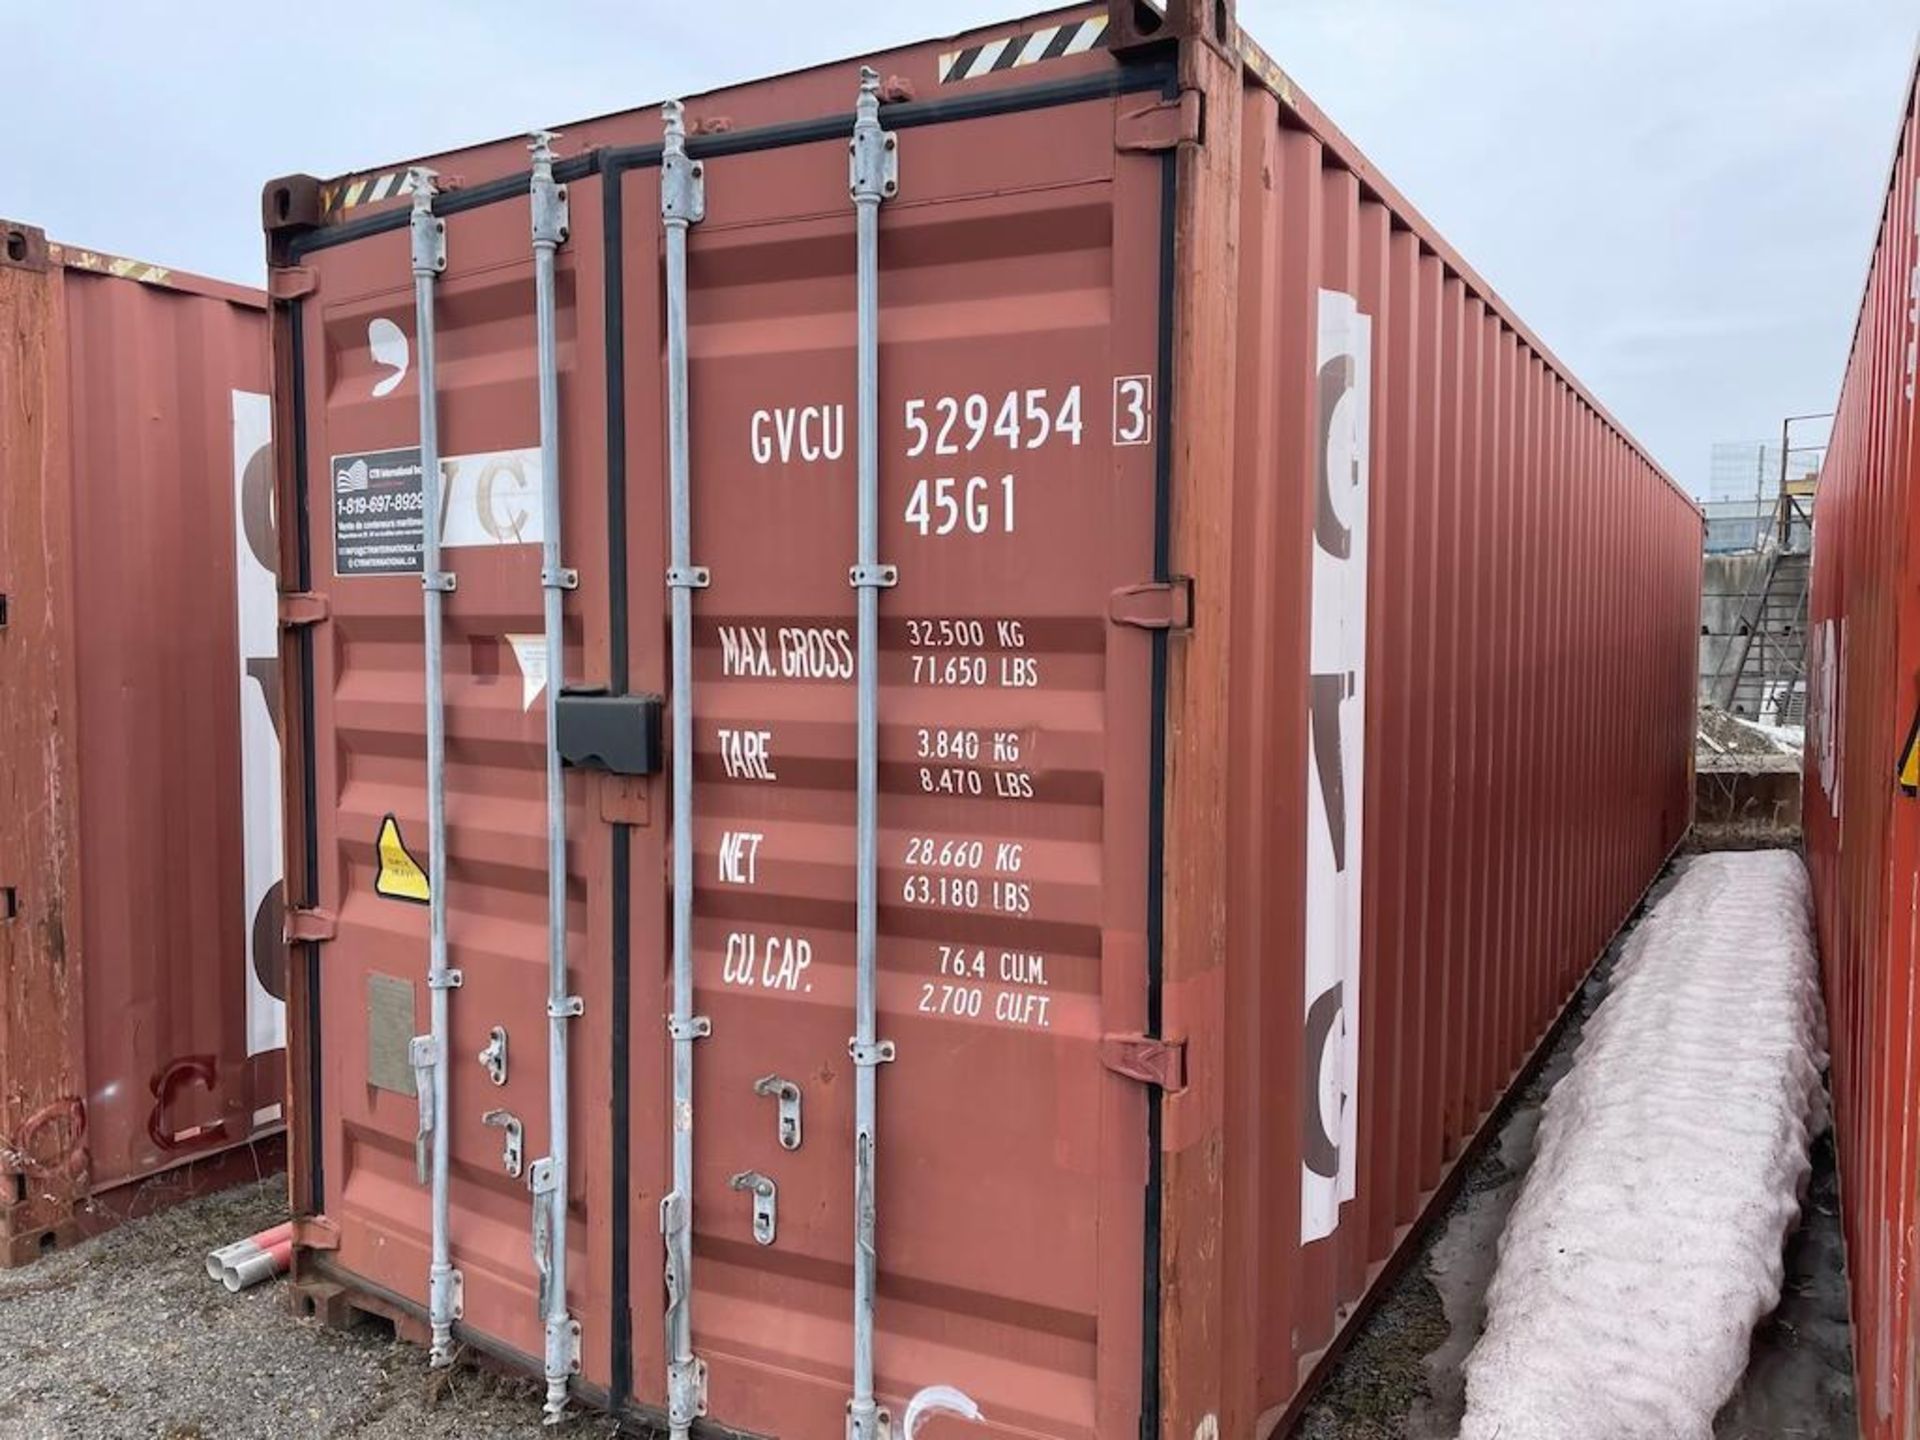 40 FT SEA CONTAINER, EXCLUDING CONTENTS, DELAYED PICK UP UNTIL MAY 13 [19] [TROIS RIVIERES] *PLEASE - Image 3 of 3